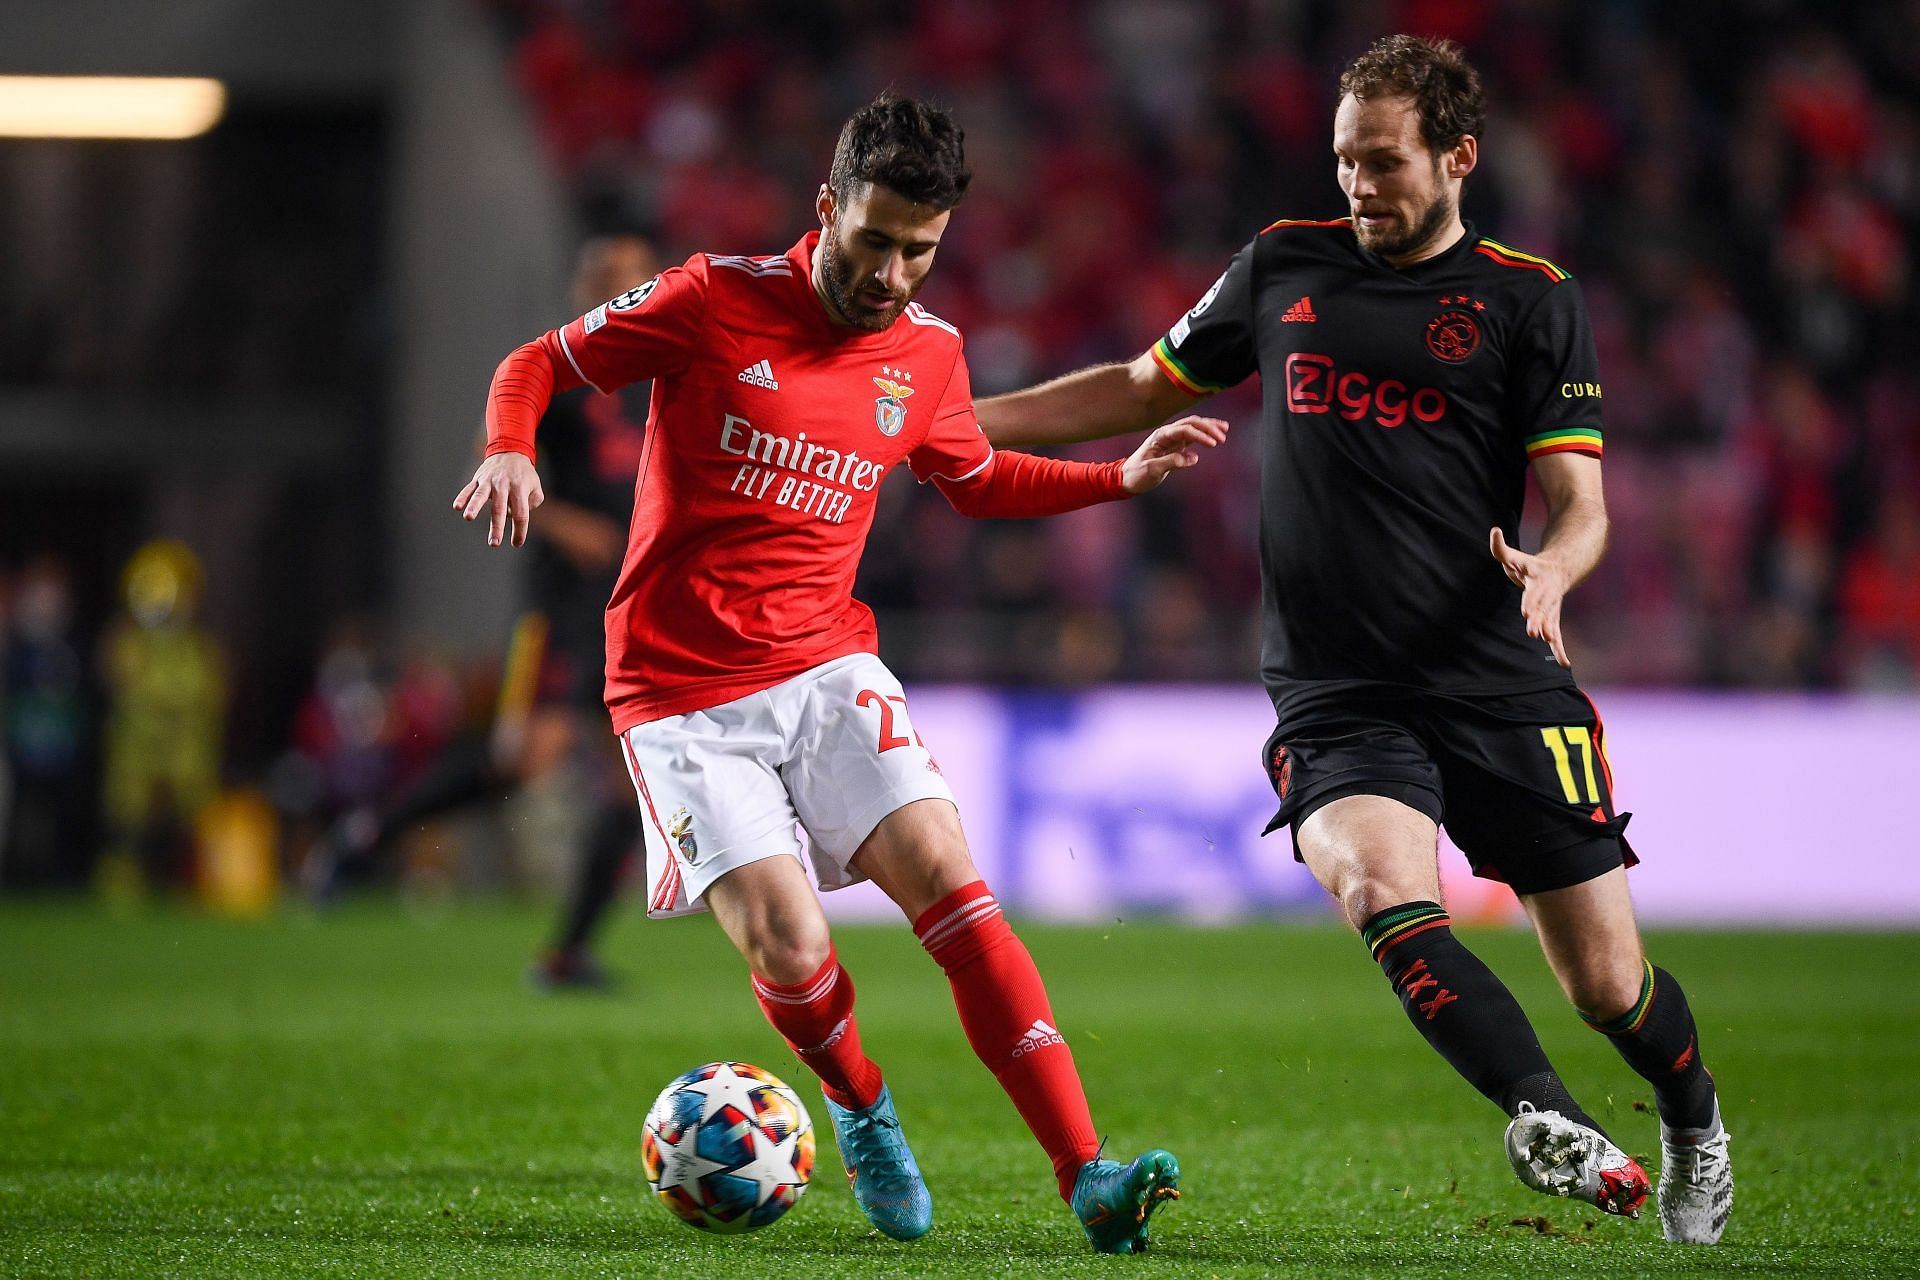 Ajax and Benfica square up in the decisive second leg UCL round of 16 fixture on Tuesday